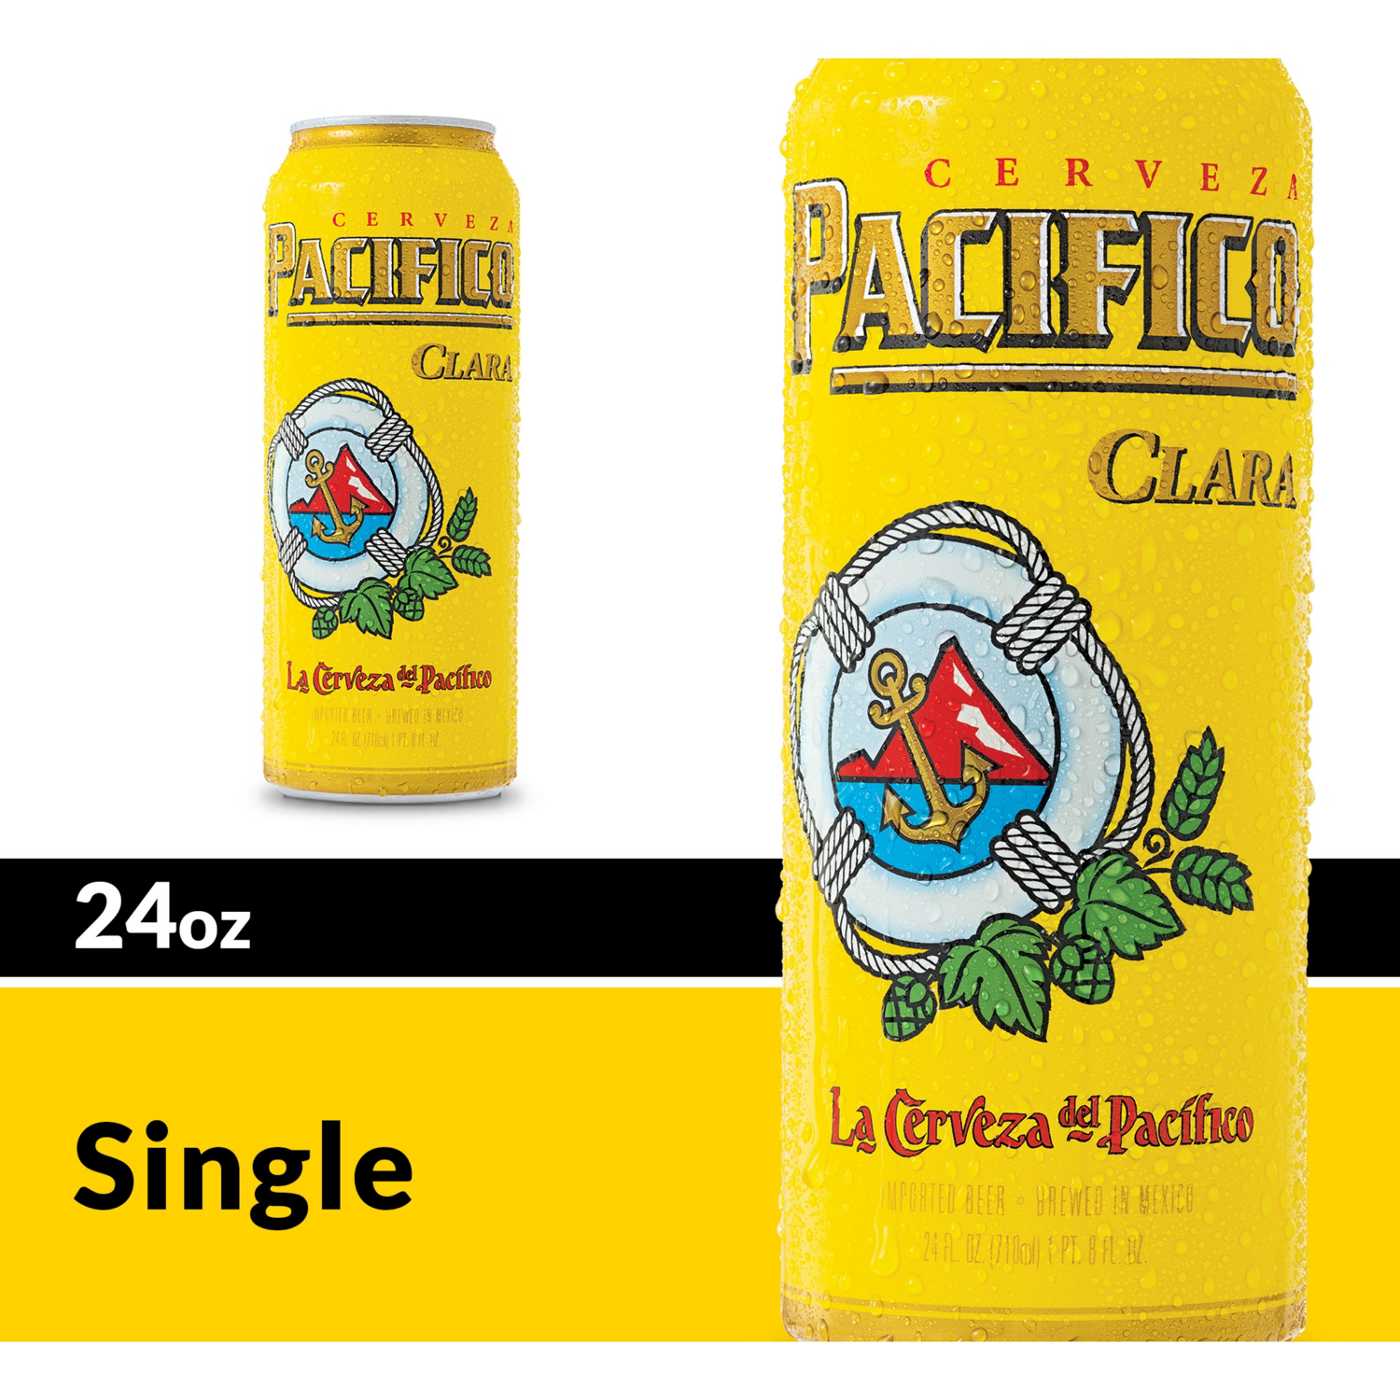 Pacifico Clara Mexican Lager Import Beer 24 oz Can; image 6 of 9